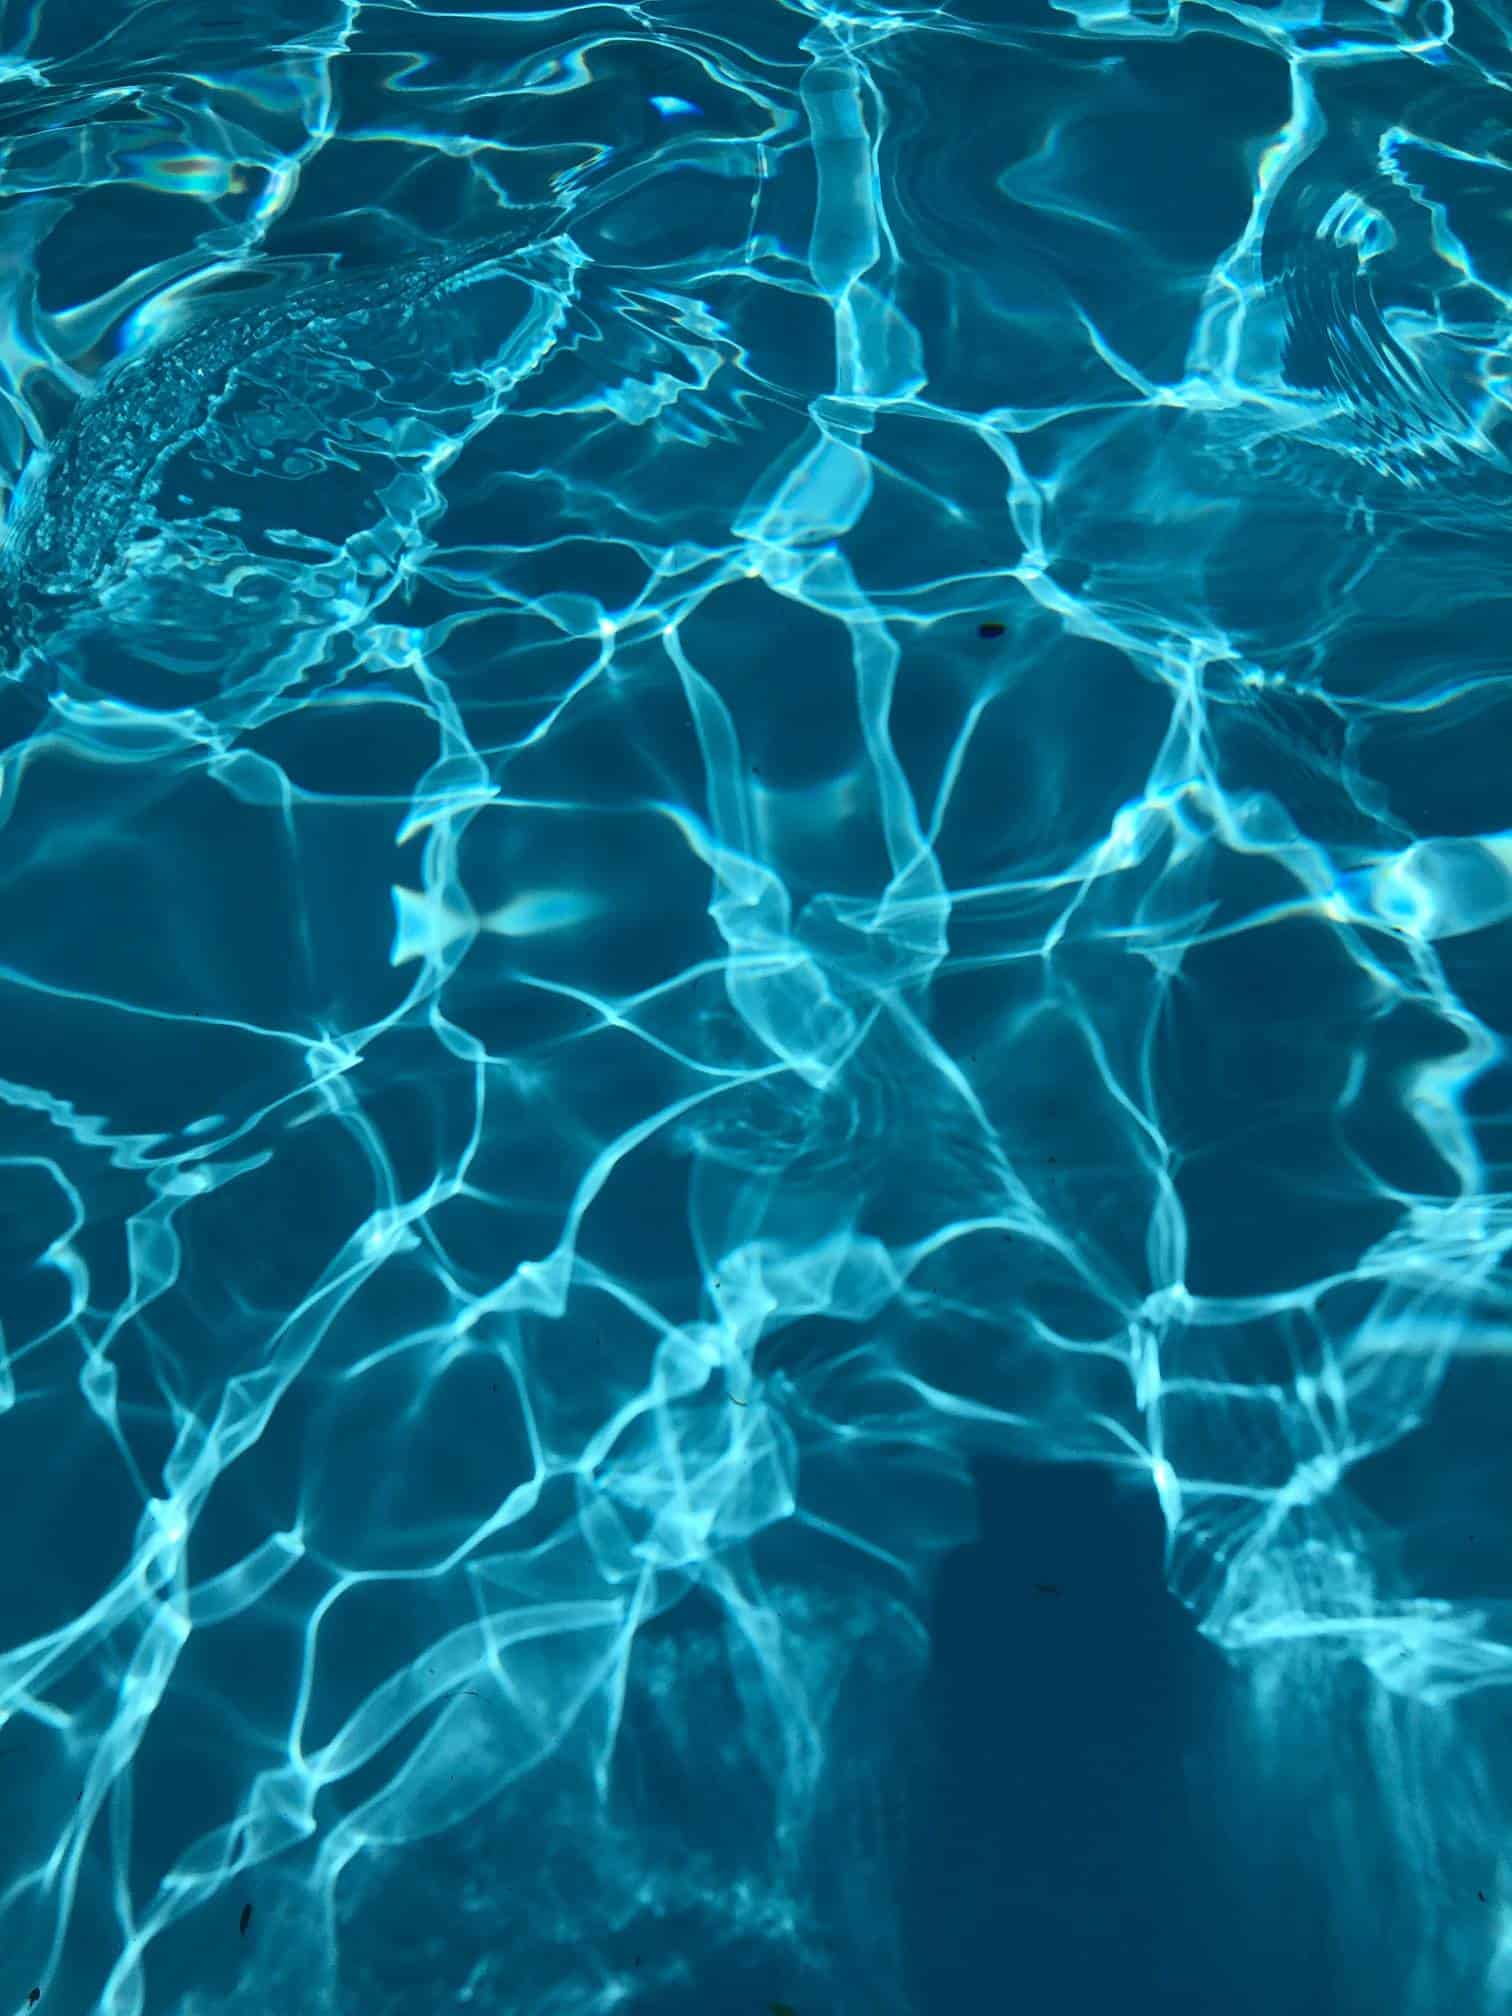 Should I Shock My Pool or Adjust pH First? - Pool Care Guy